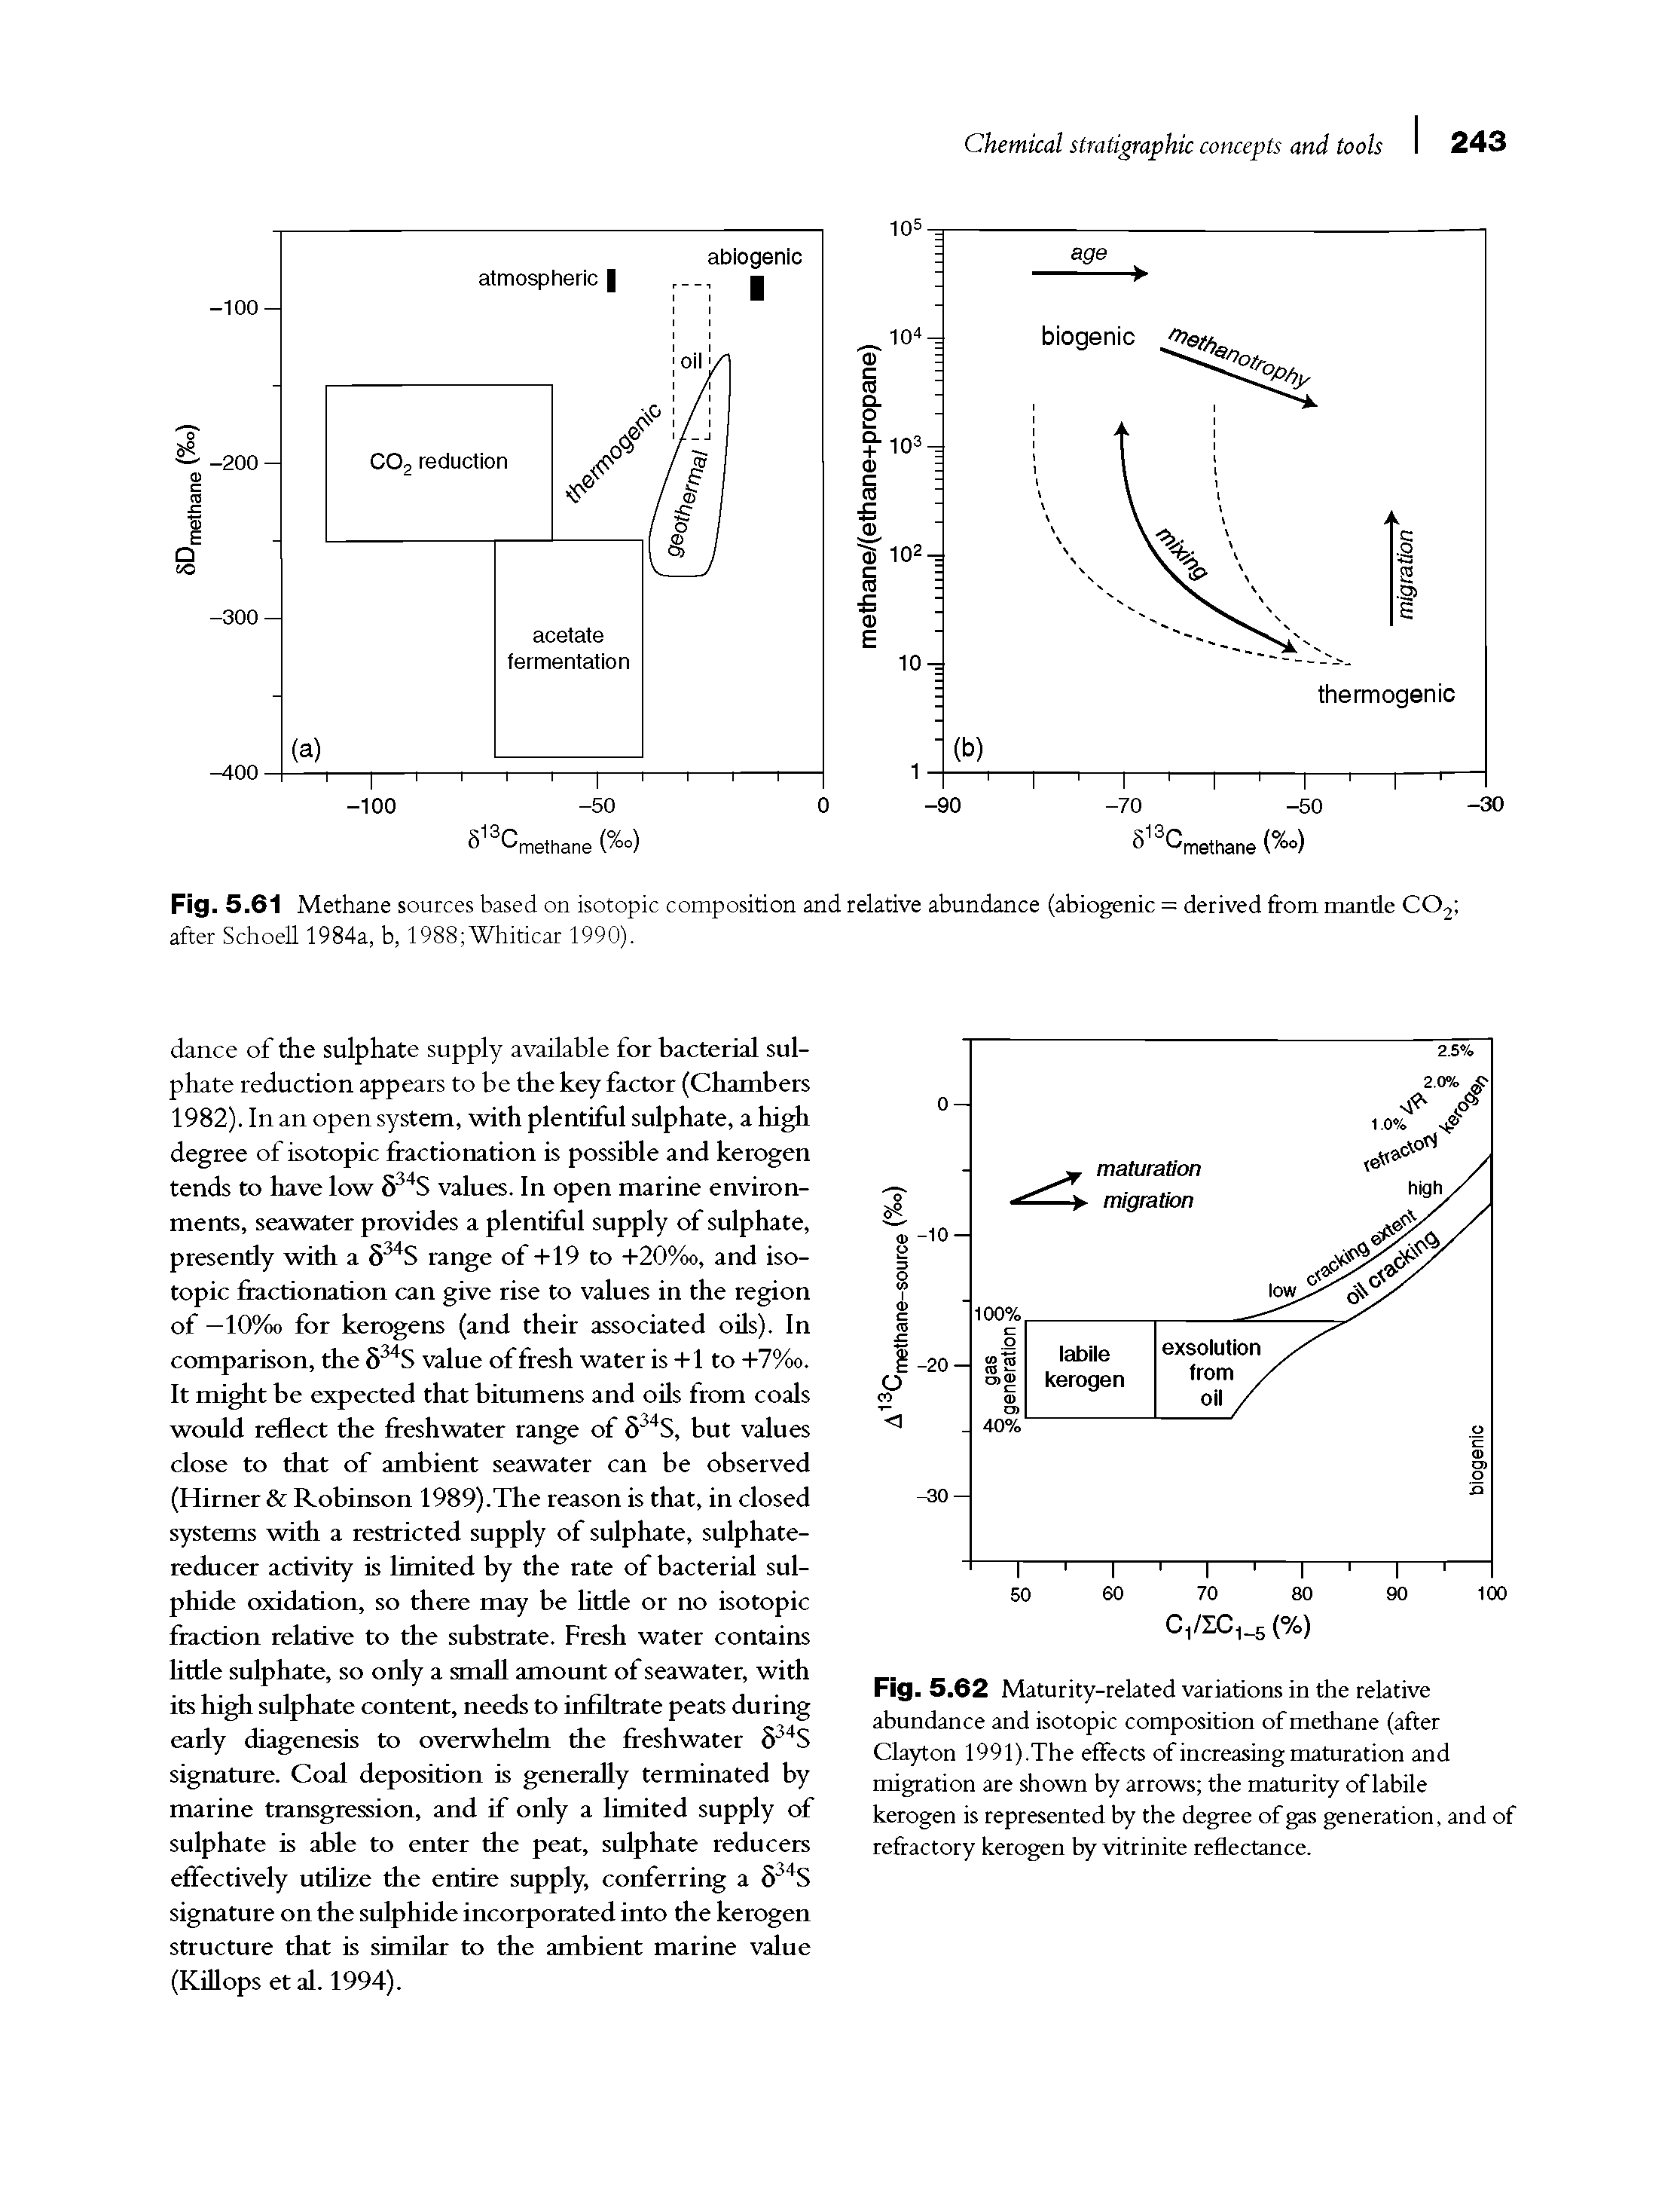 Fig. 5.62 Maturity-related variations in the relative abundance and isotopic composition of methane (after Clayton 1991).The effects of increasing maturation and migration are shown by arrows the maturity of labile kerogen is represented by the degree of gas generation, and of refractory kerogen by vitrinite reflectance.